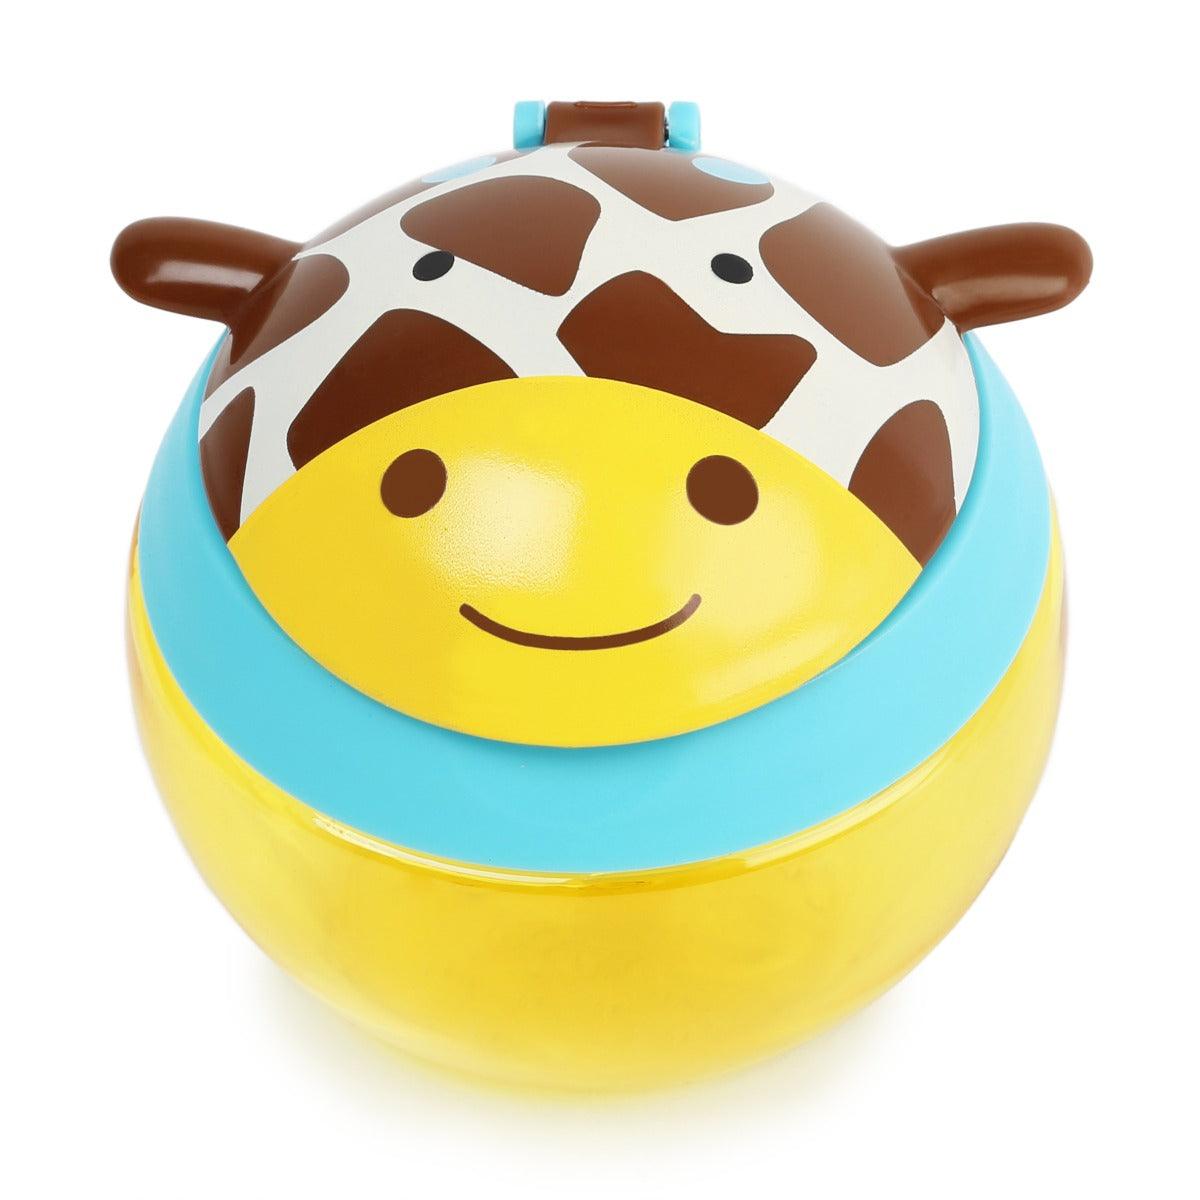 Skip Hop Zoo Snack Cup Giraffe - Weaning Accessory For Ages 1-4 Years